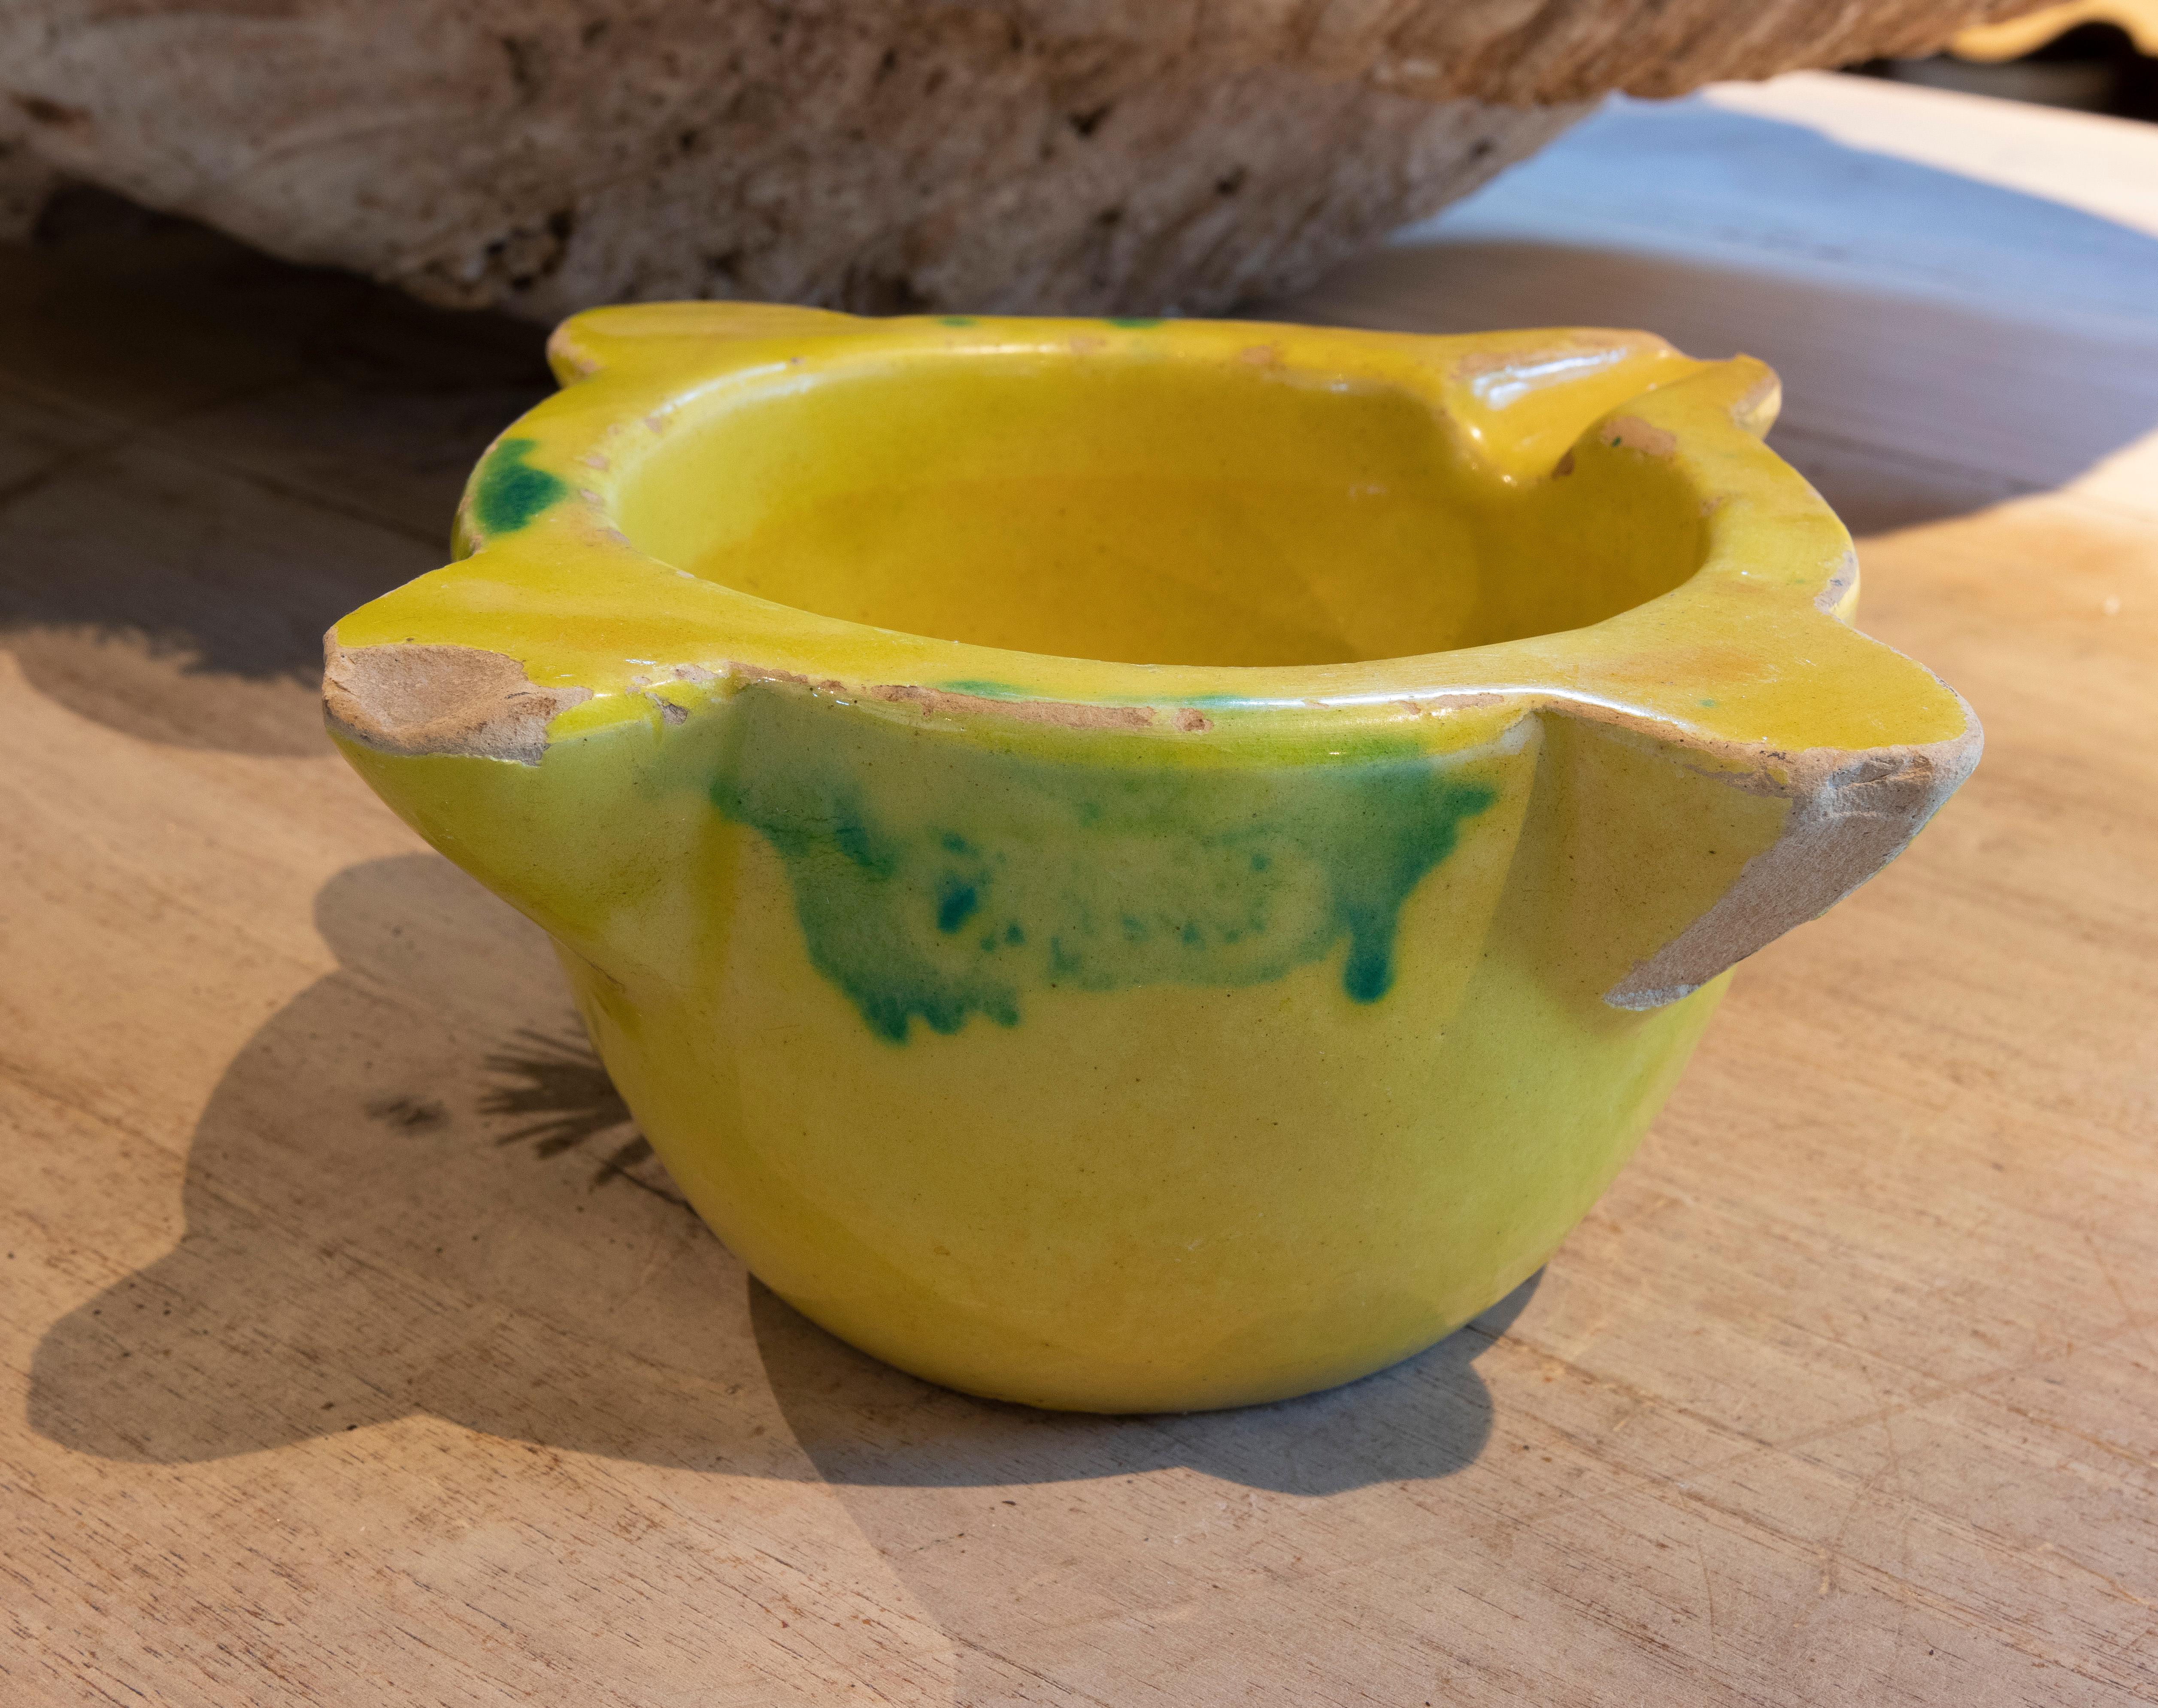 Spanish glazed ceramic mortar in yellow and green color.